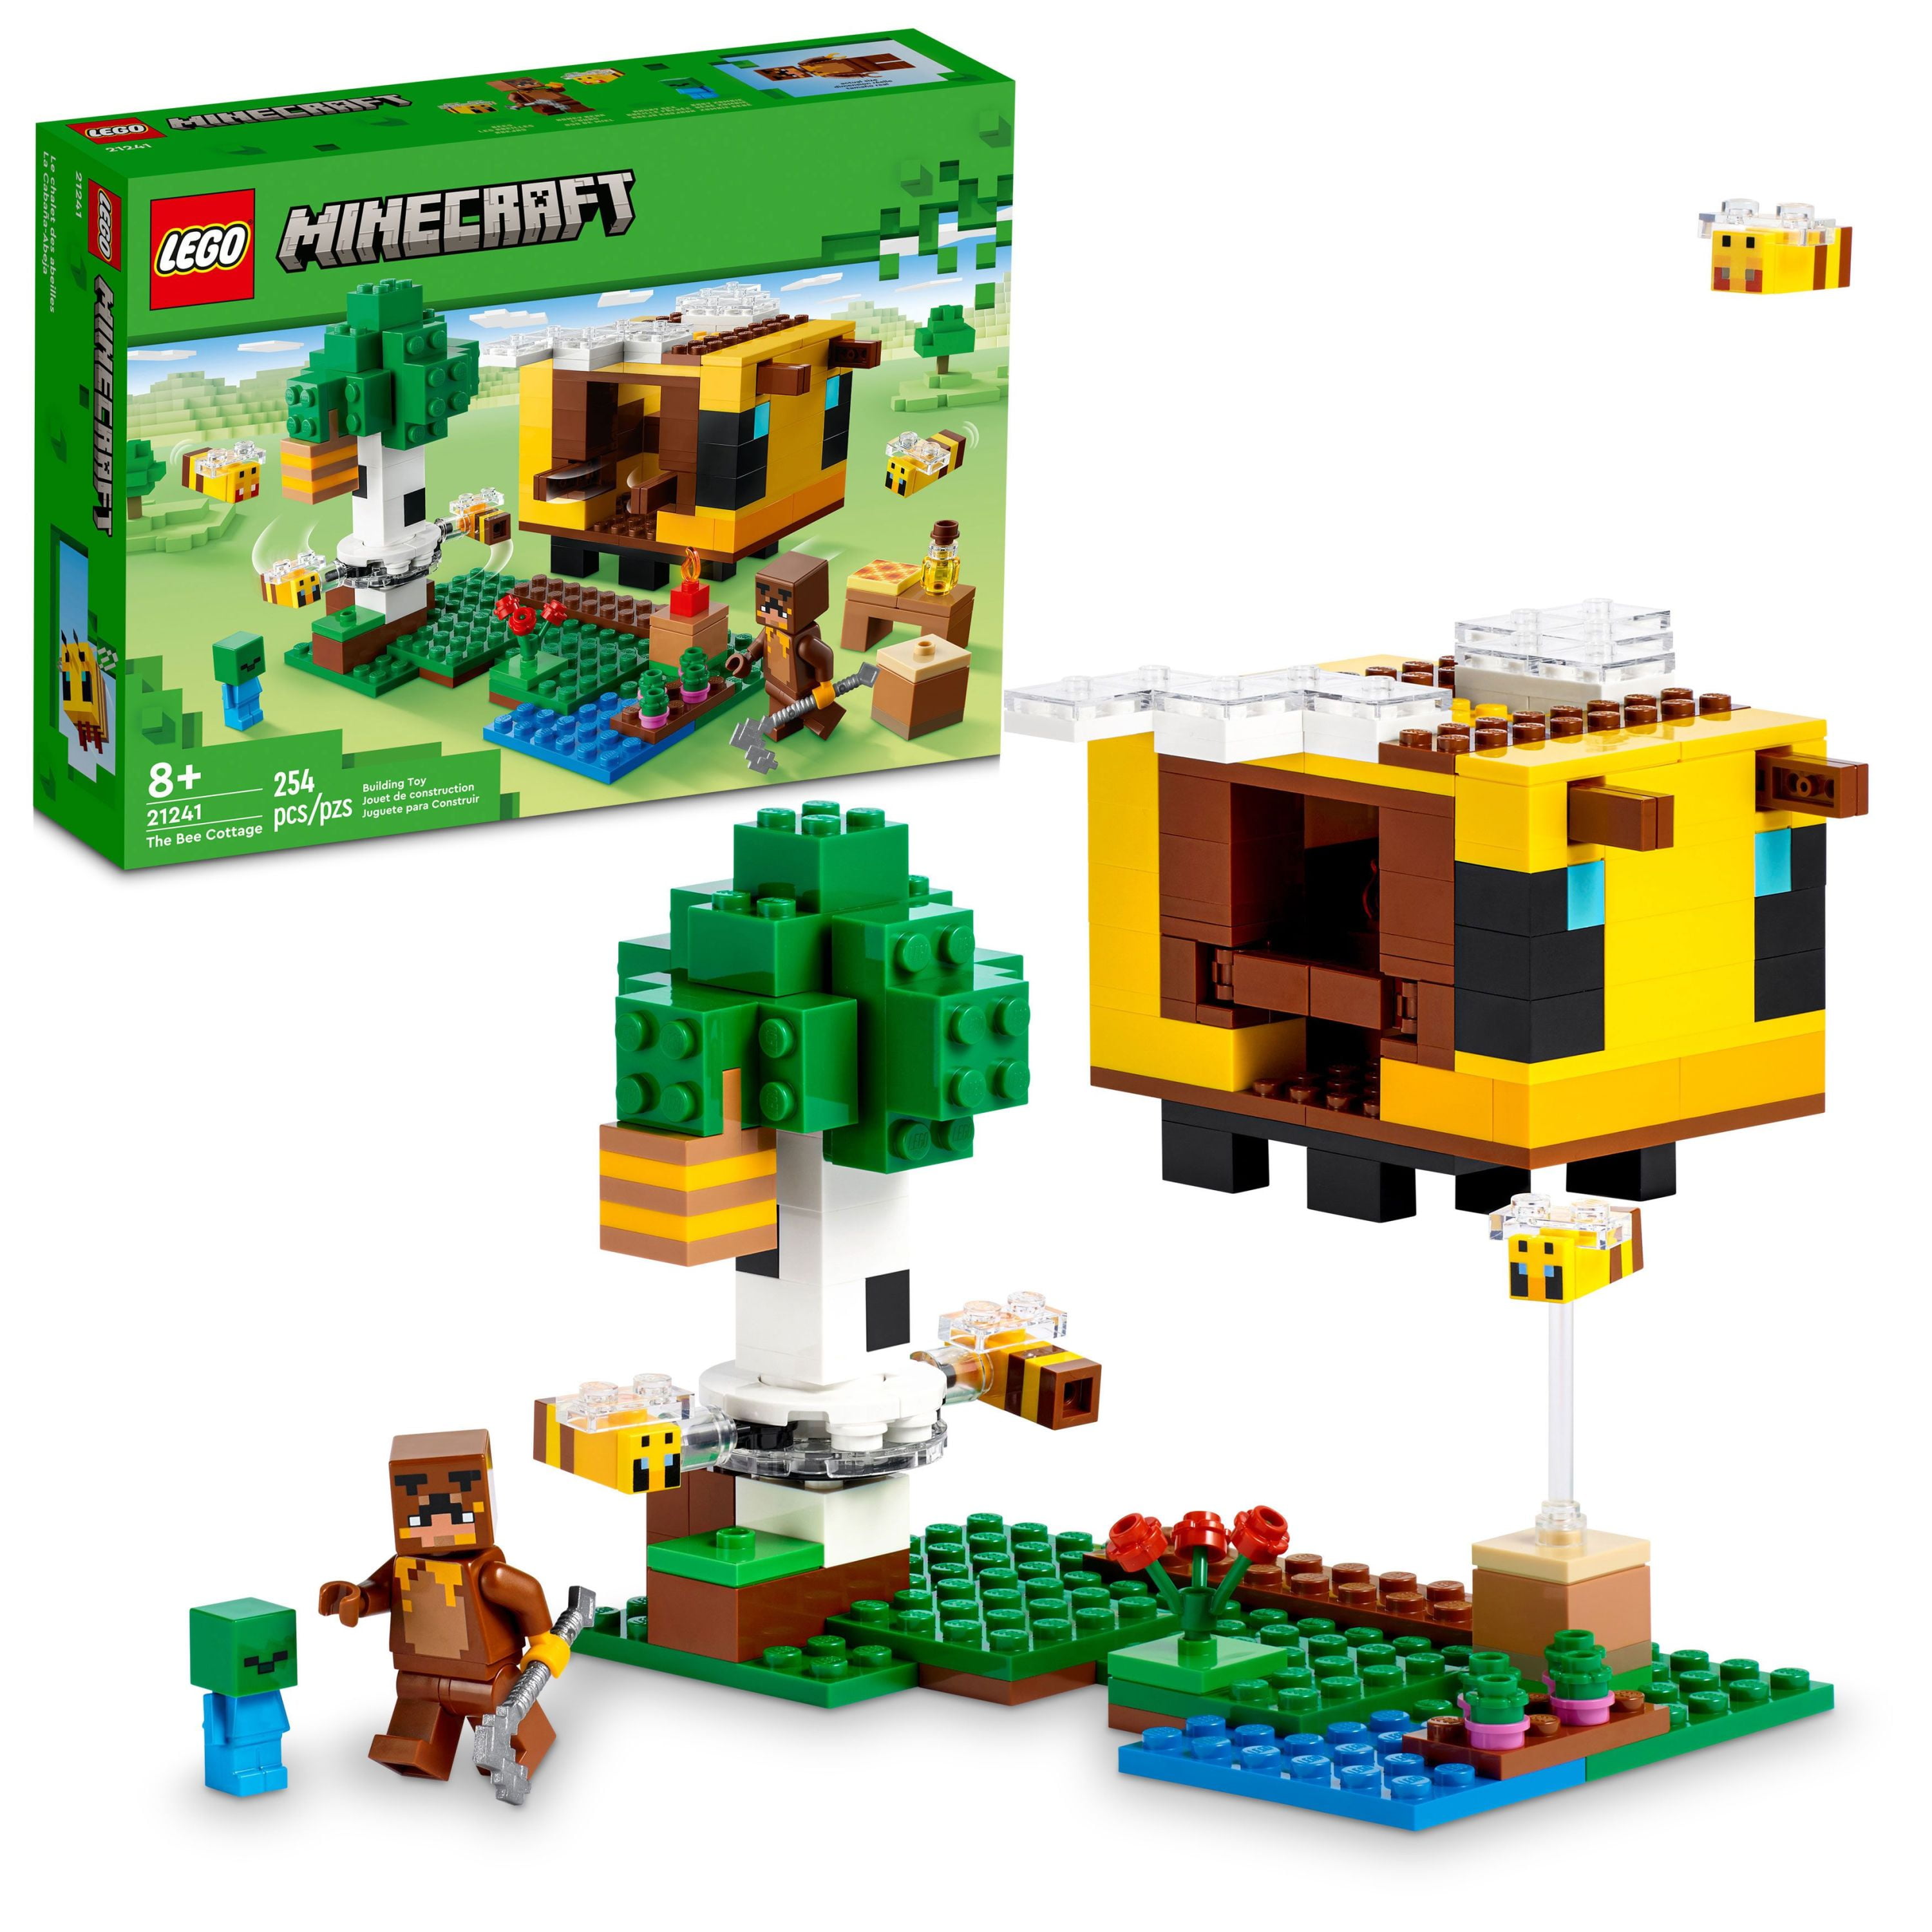 LEGO Minecraft Bee Cottage 21241 Building Set - Construction Toy with Buildable House, Farm, Baby Zombie, and Figures, Game Inspired Birthday Gift Idea for and Girls Ages 8+ Walmart.com